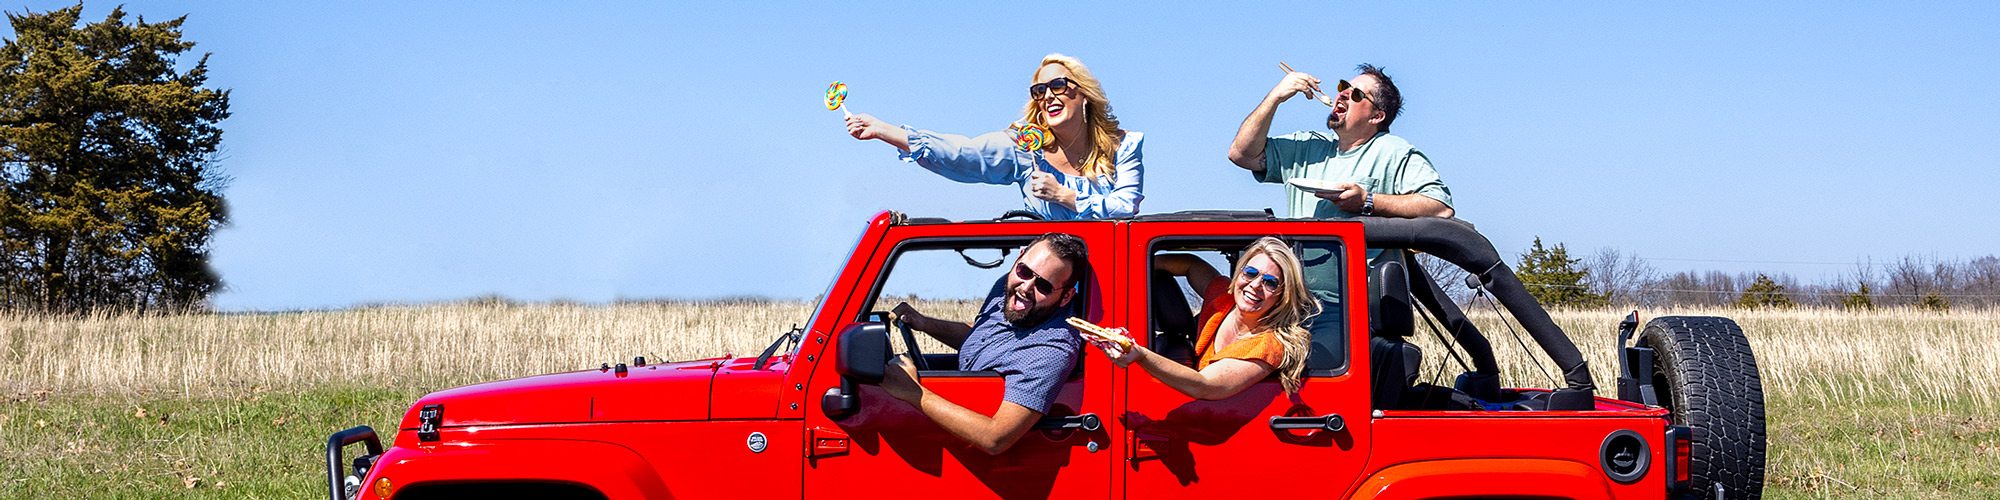 People riding in red jeep outdoors